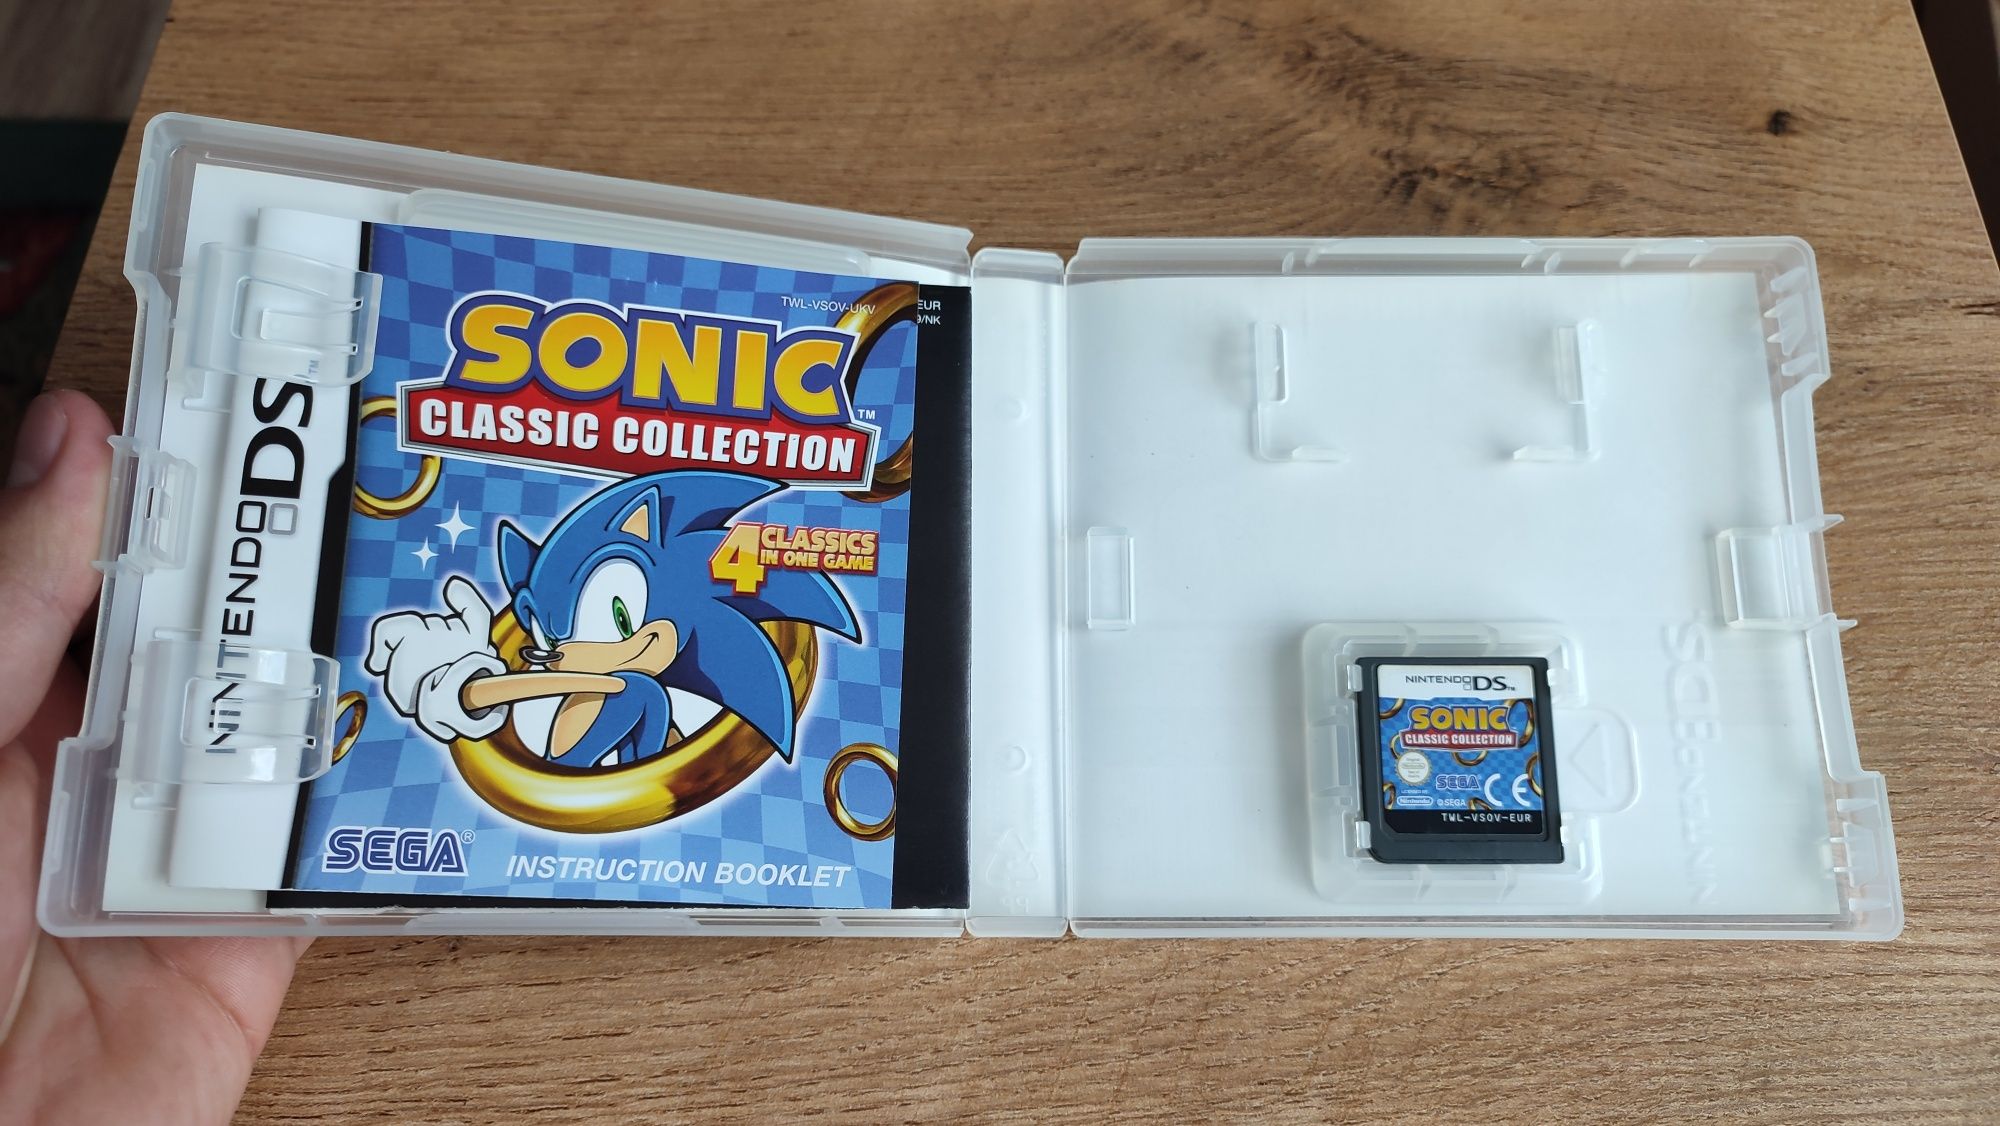 Sonic Classic Collection Nintendo DS 3xAng